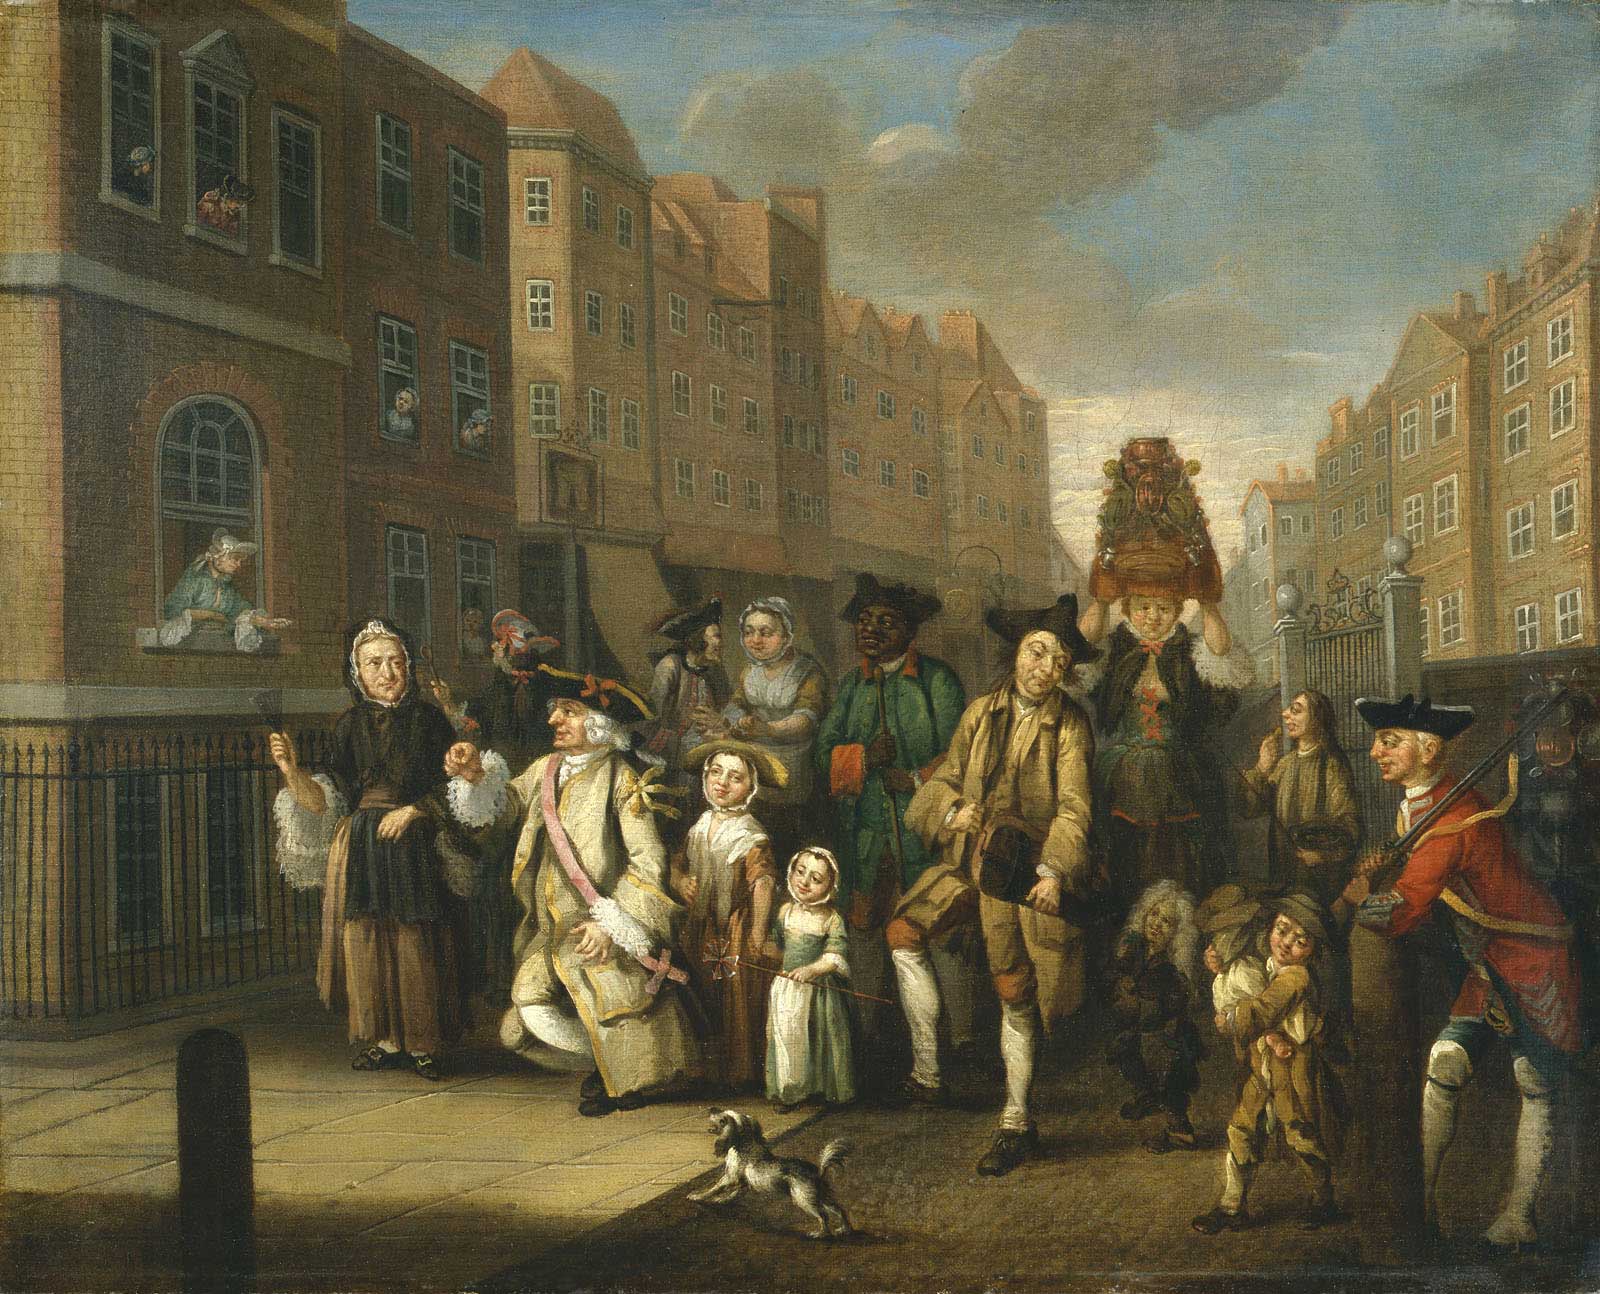 Painting May Morning by John Collet, showing a traditional London parade in the 1780s.